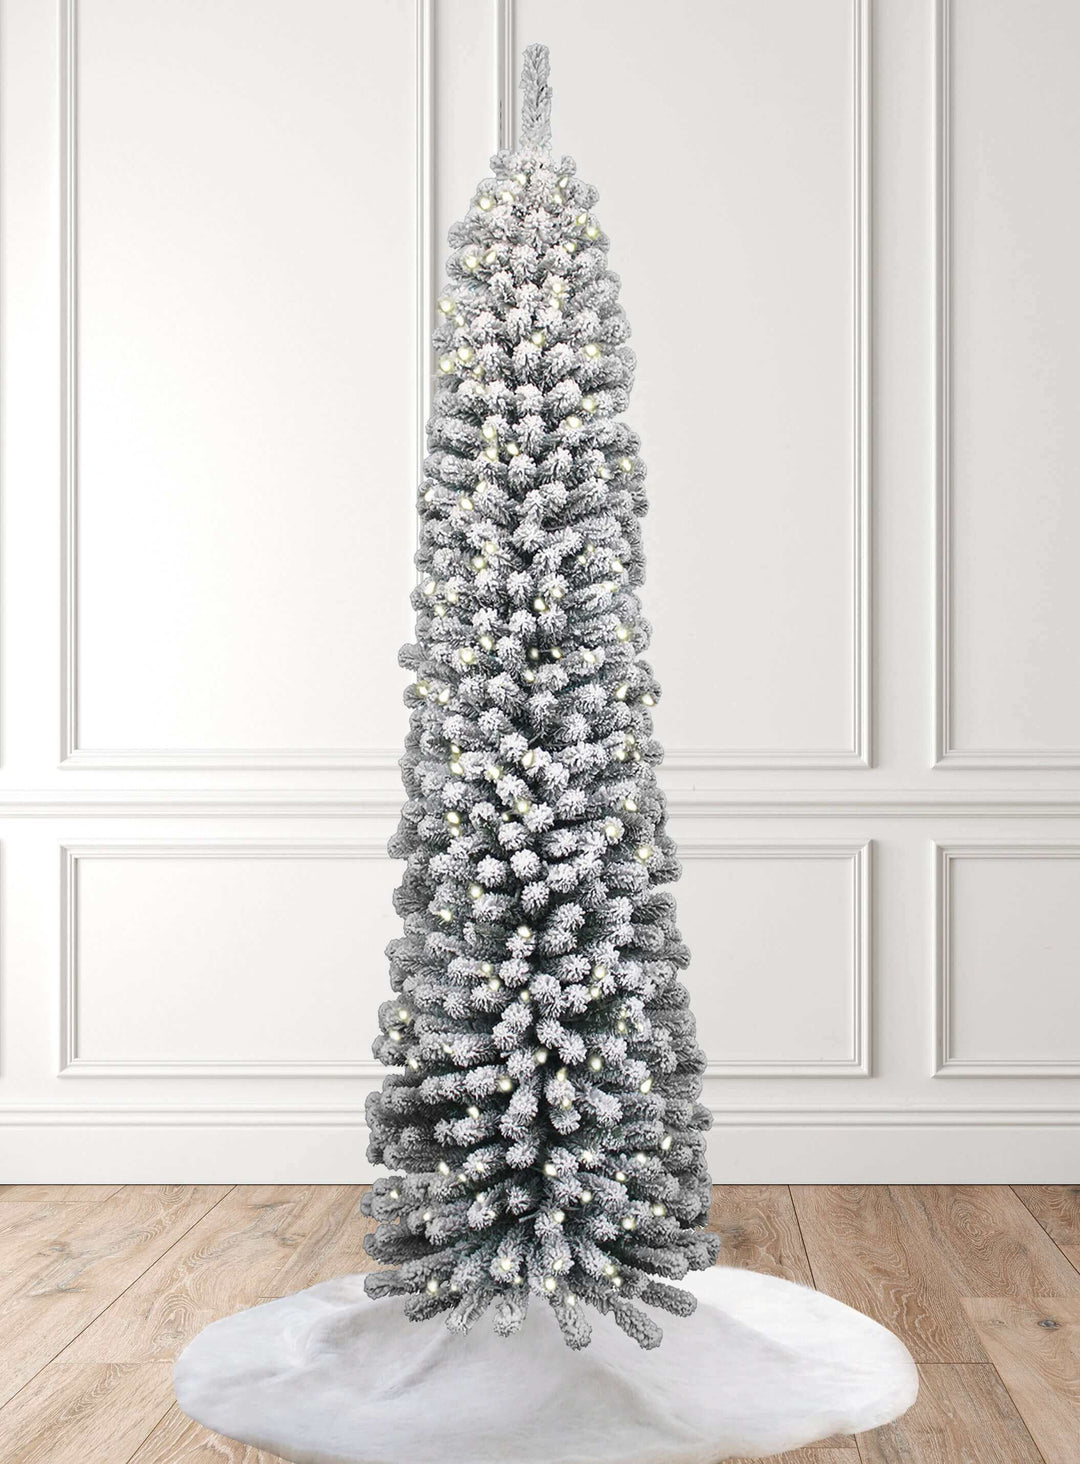 King of Christmas 8' Prince Flock Pencil Artificial Christmas Tree with 300 Warm White LED Lights